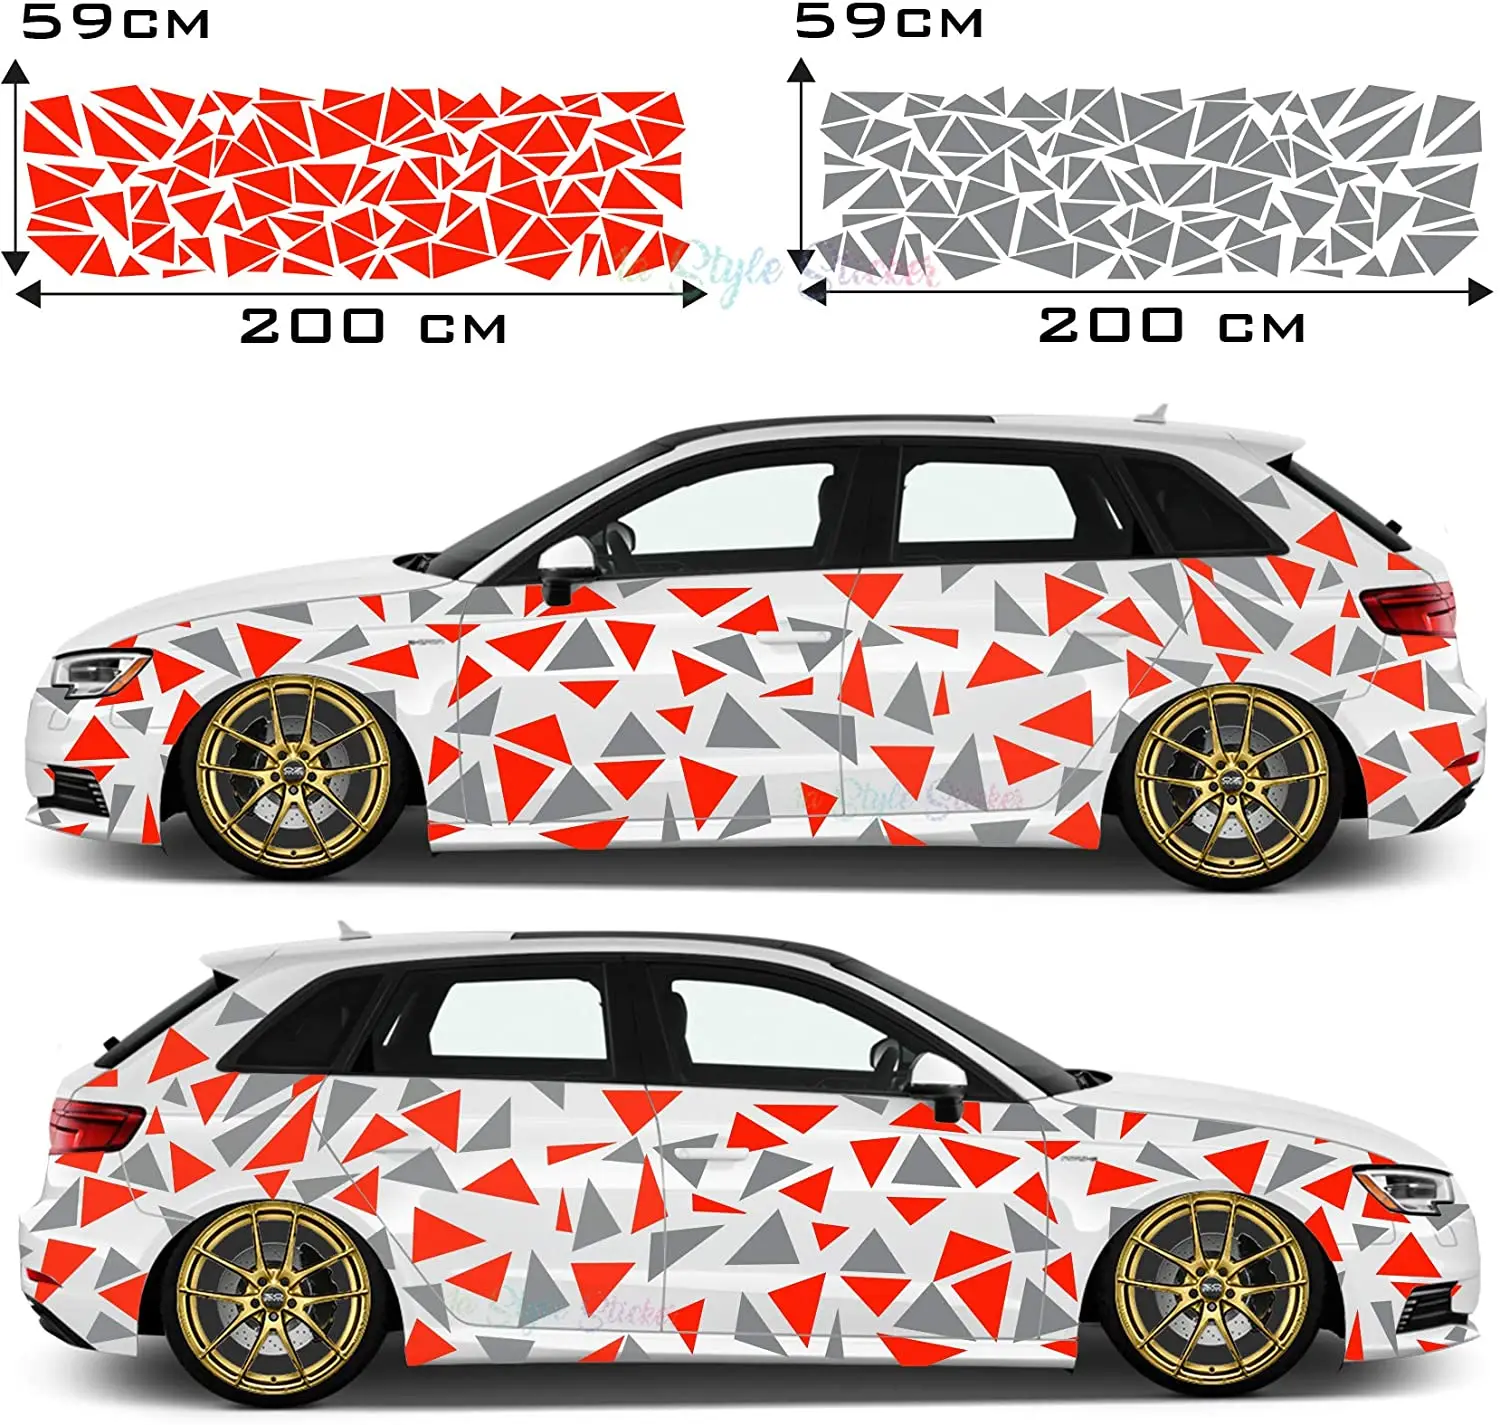 

Car triangles car sticker sticker side car car tattoo colored camouflage look camo sticker pack of camouflage style side decals